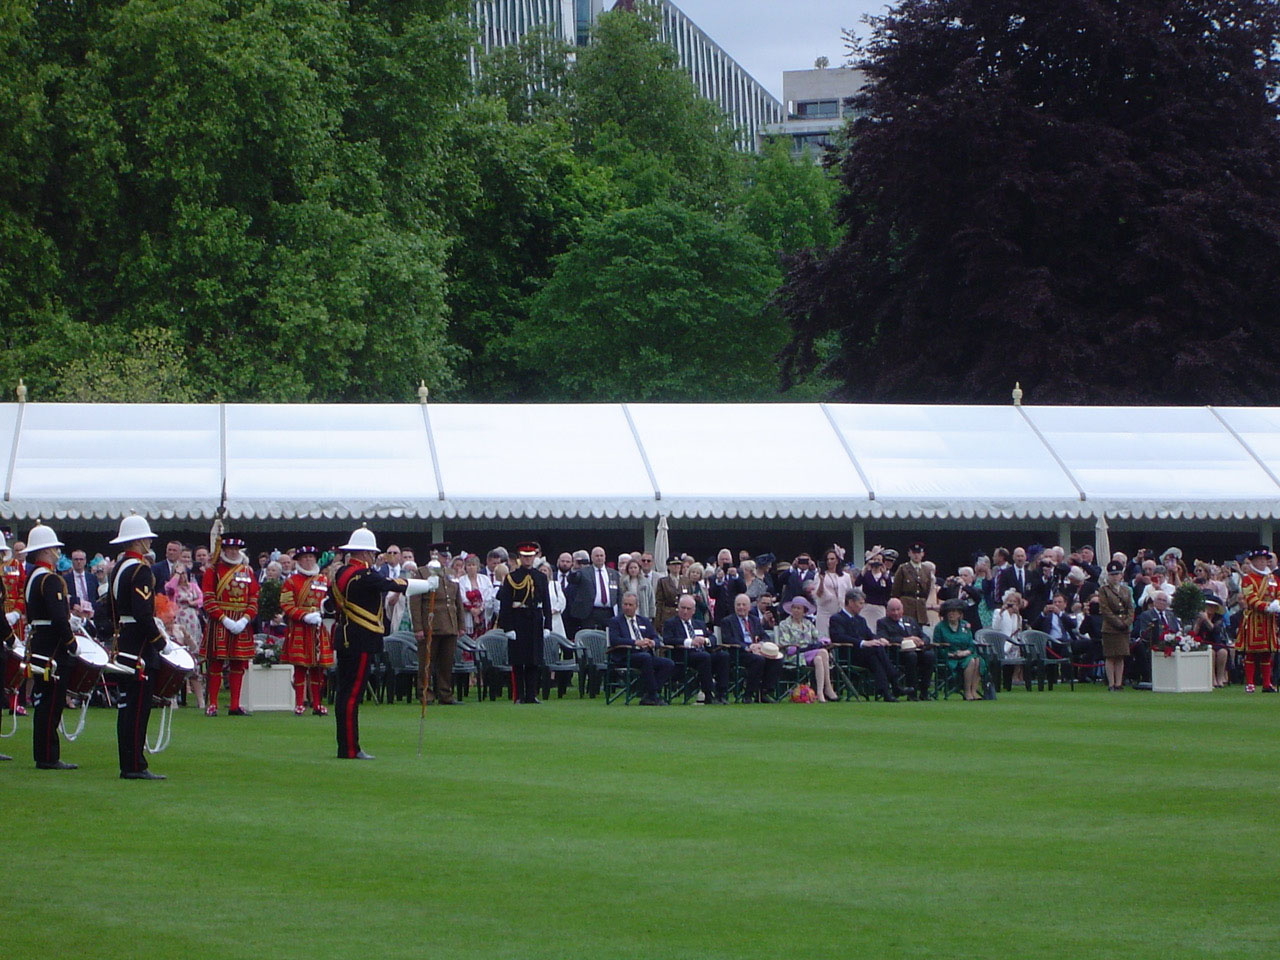 A Garden Party at Buckingham Palace on 12th May 2022